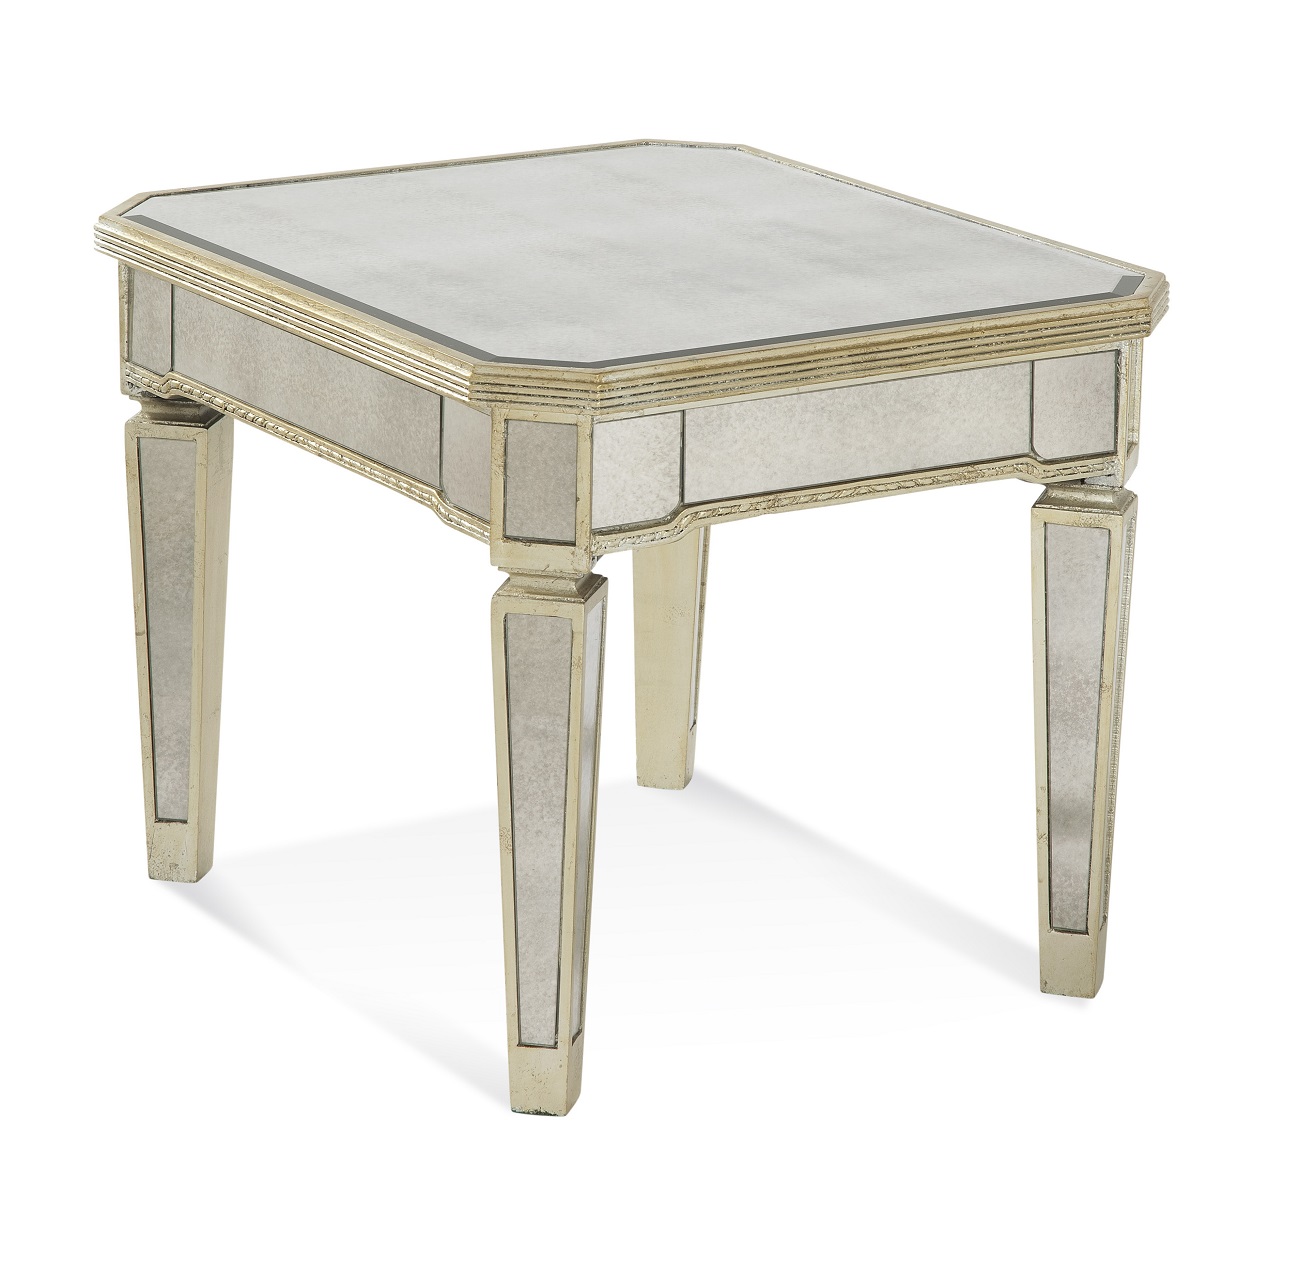 Bassett Mirror Borghese End chess table for sale Brooklyn, New York   